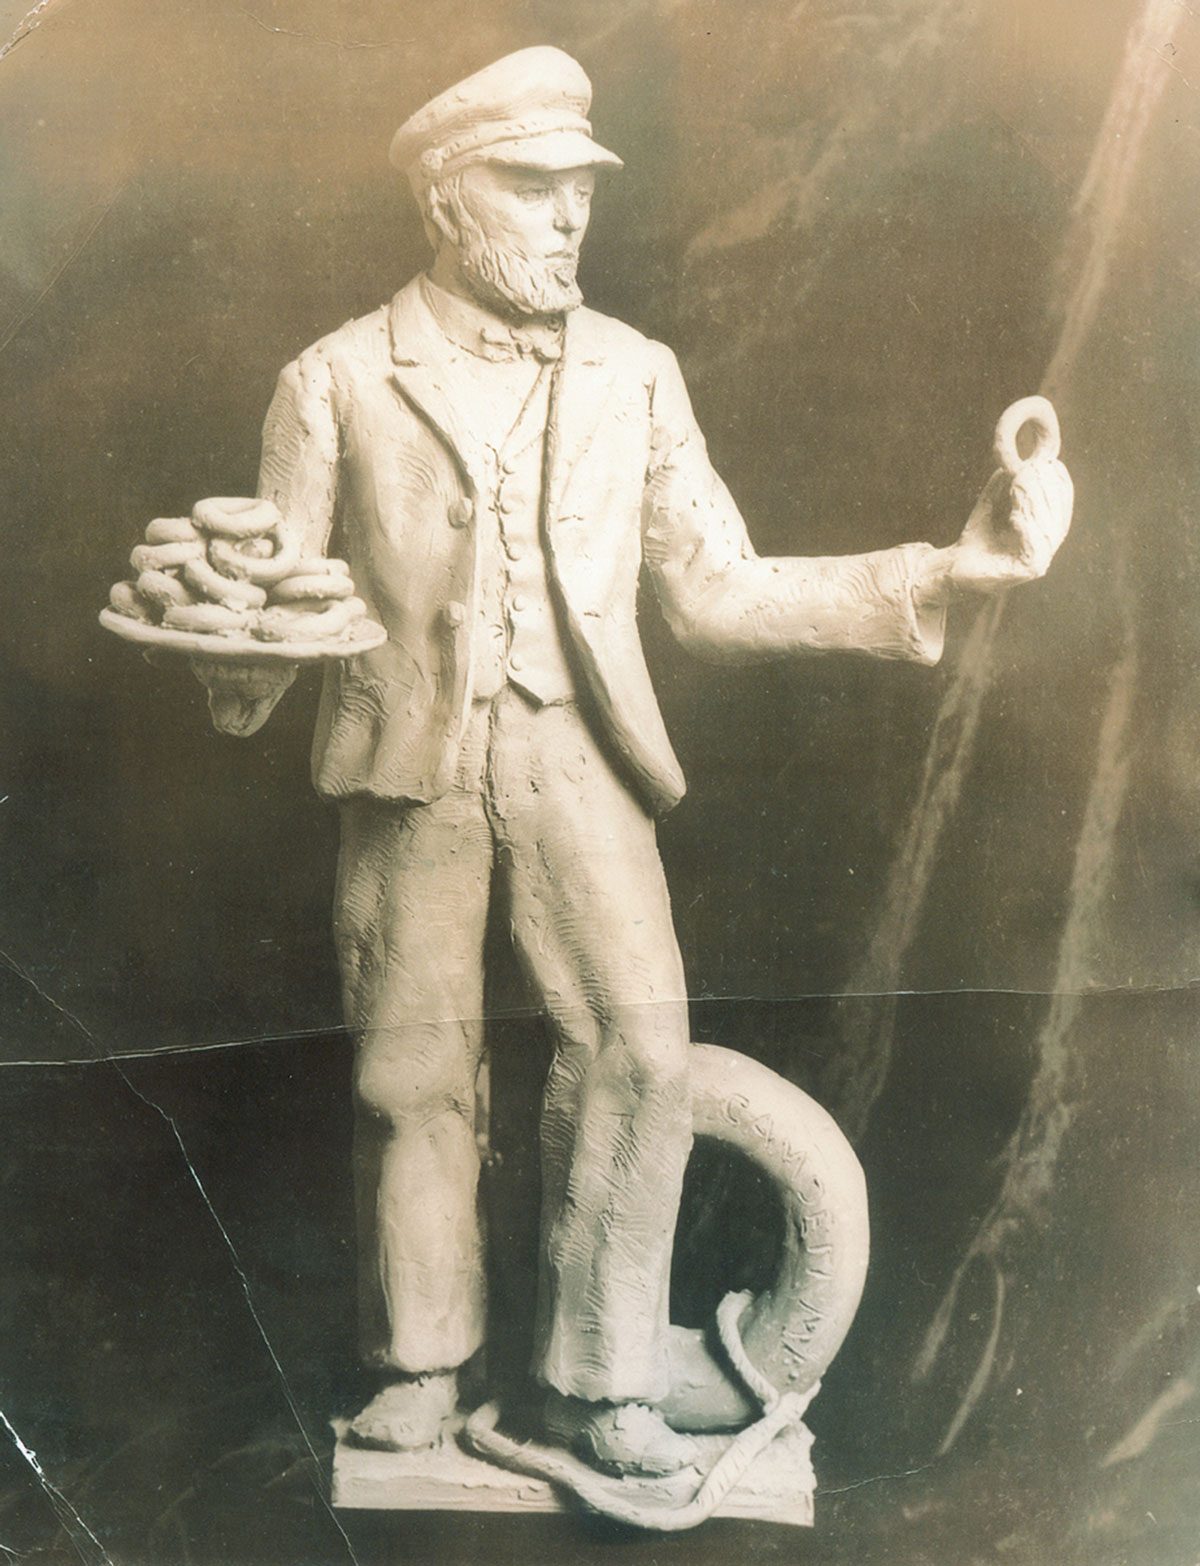 Model of proposed statue of Captain Hanson Crockett Gregory by sculptor Victor Khalil, ca. 1940. Photo courtesy of the Camden Public Library, Camden, Maine.